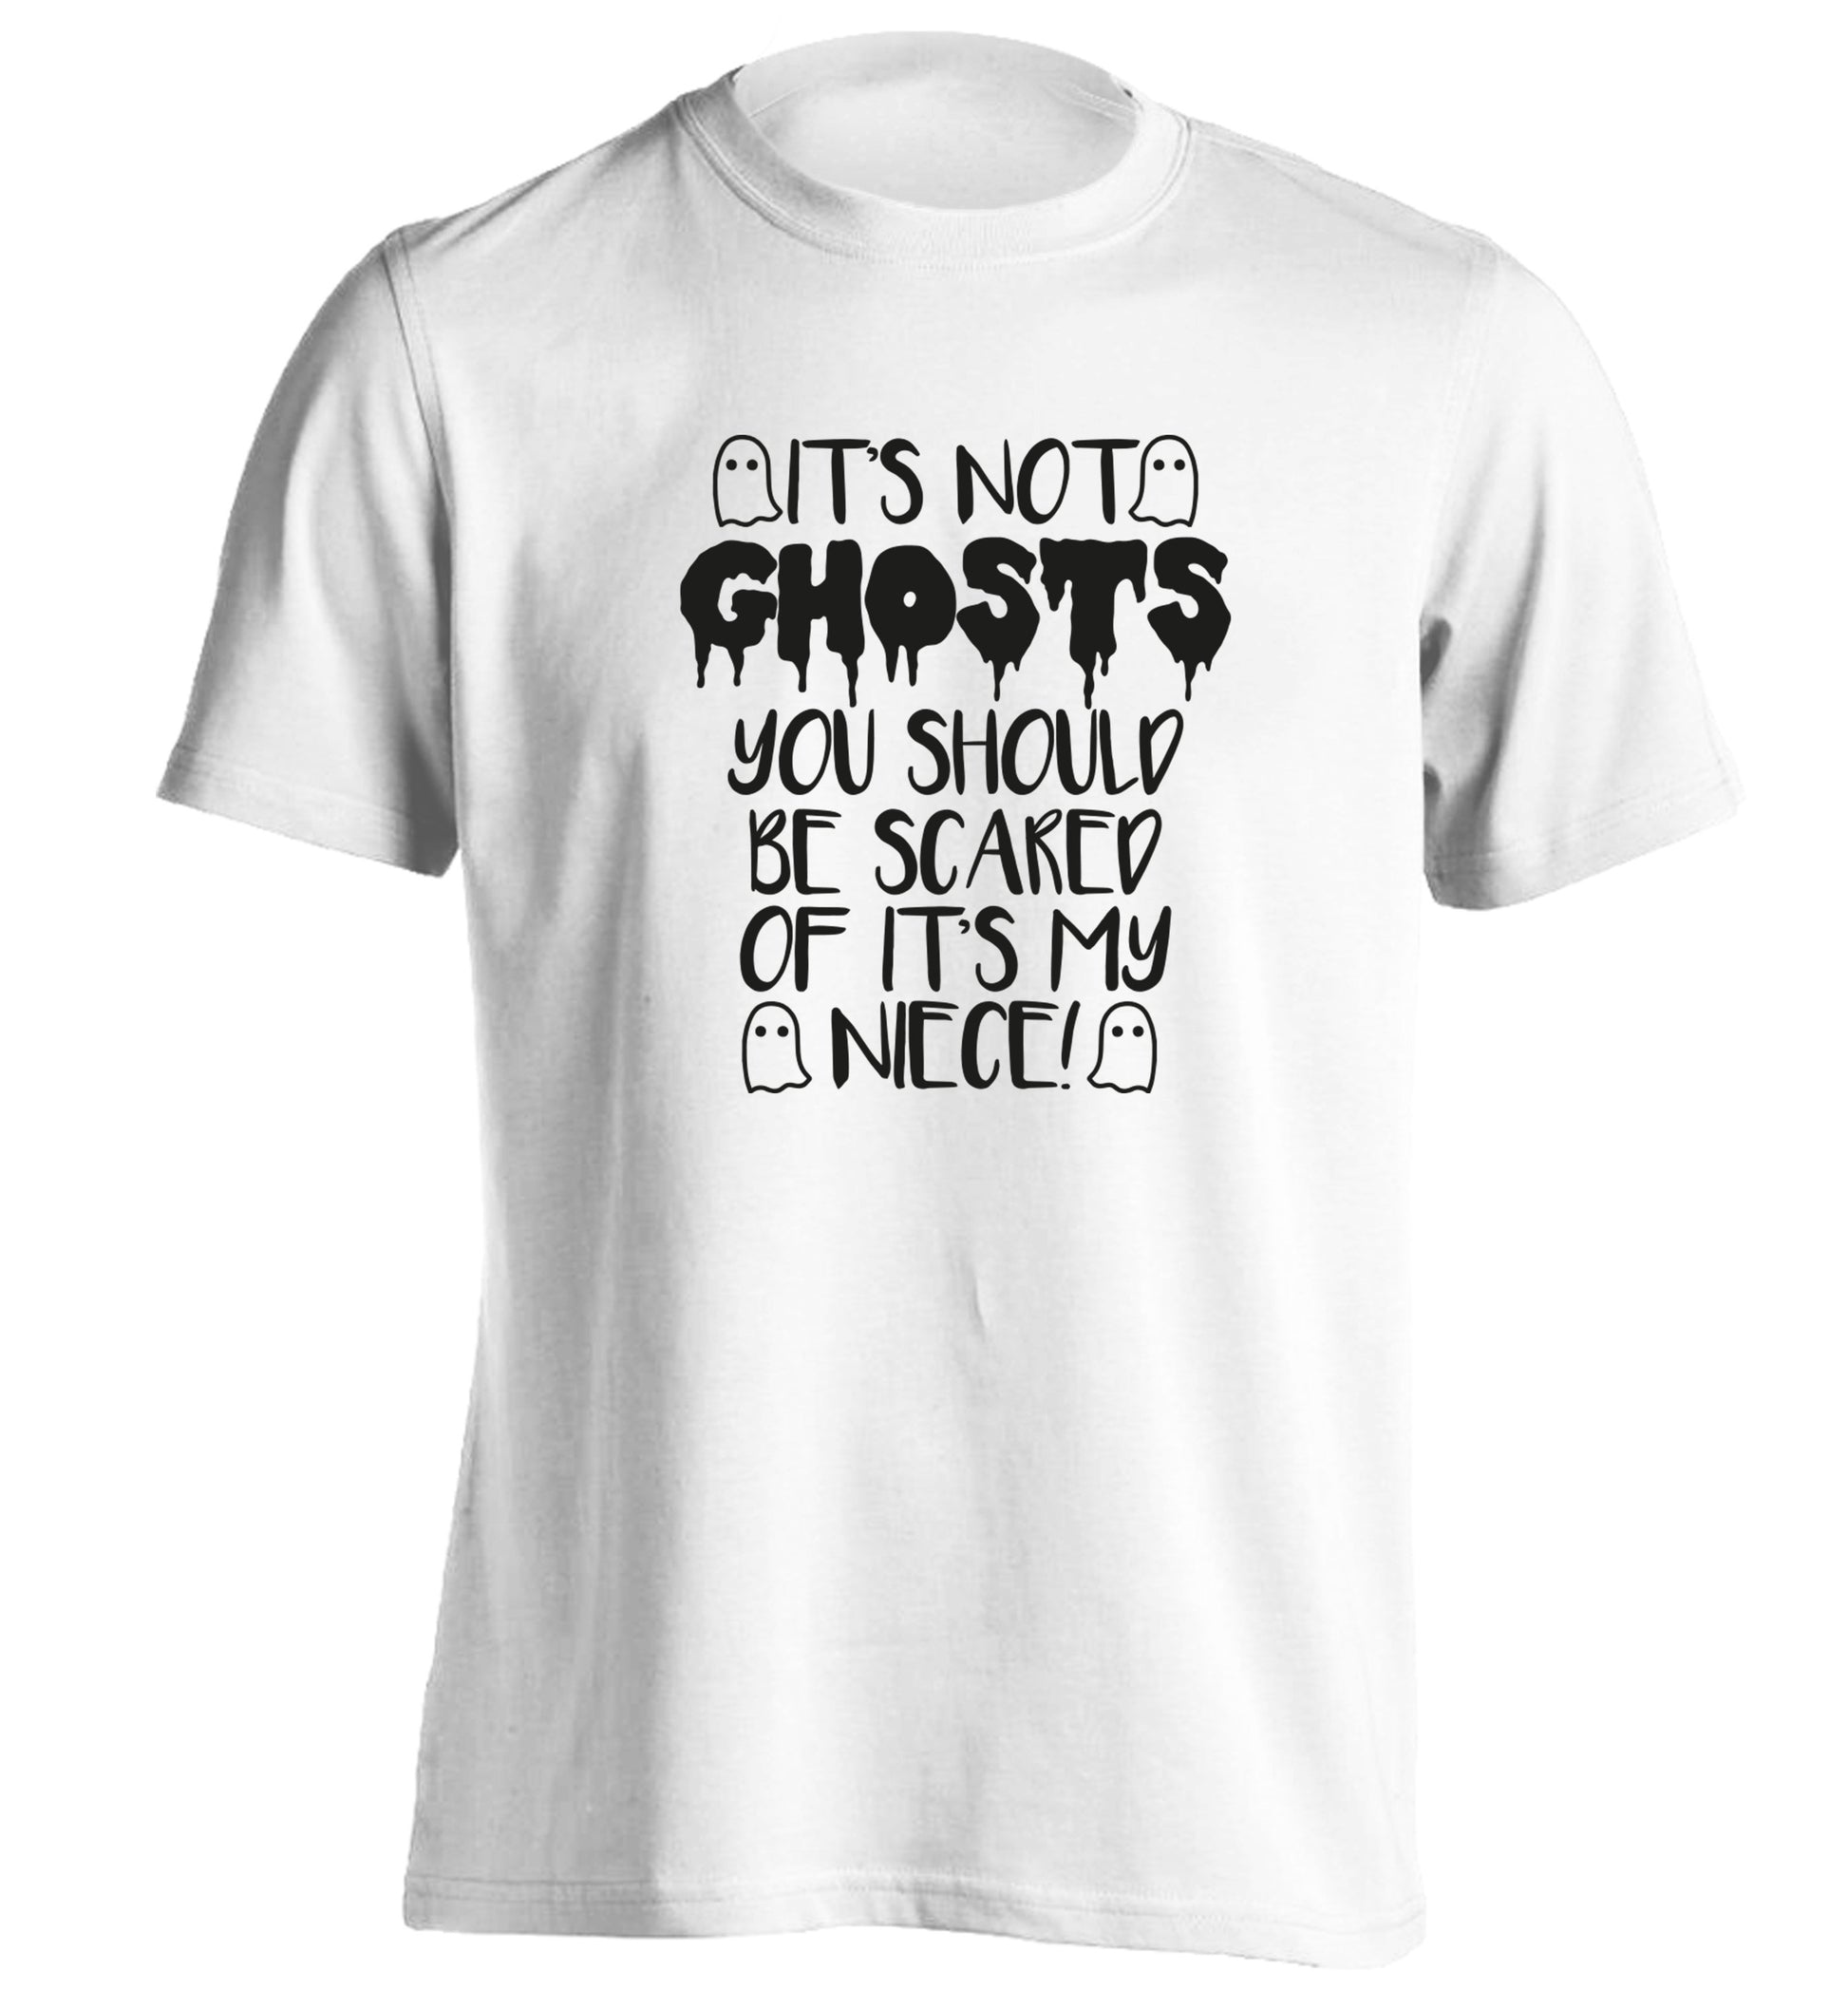 It's not ghosts you should be scared of it's my niece! adults unisex white Tshirt 2XL